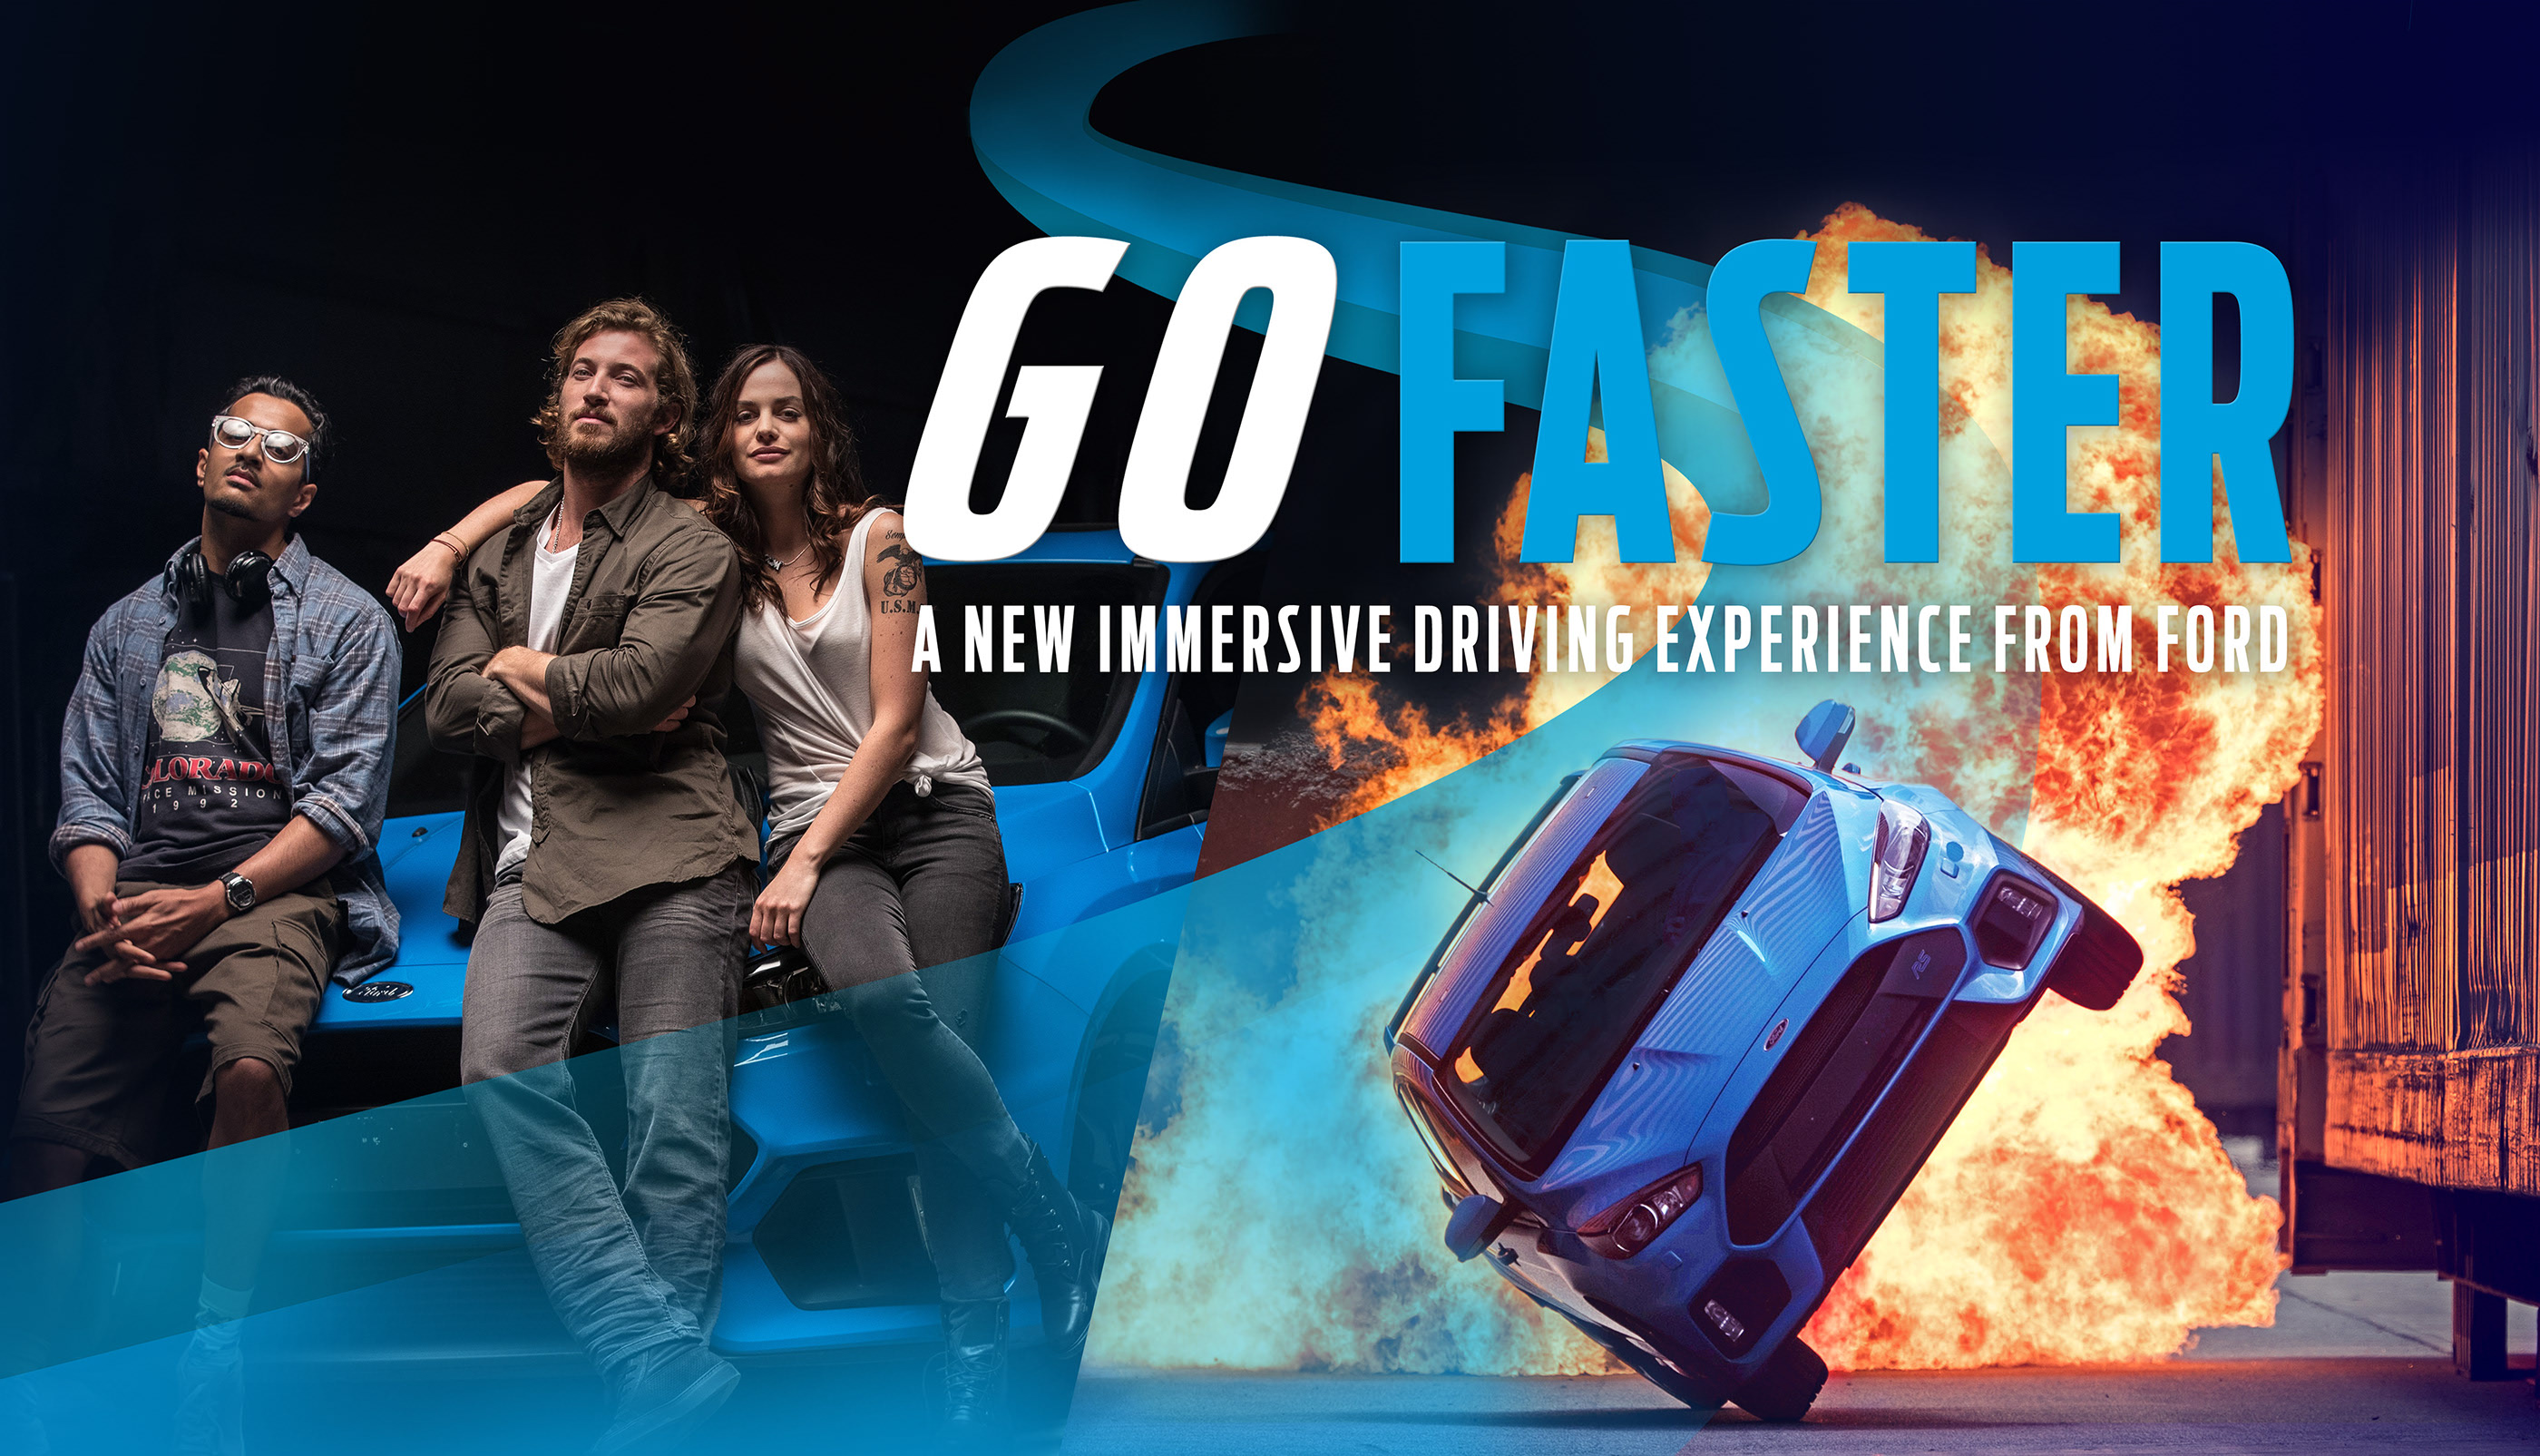 Movie Stunts. Ford experience. Stunt Driver. Ford go further.